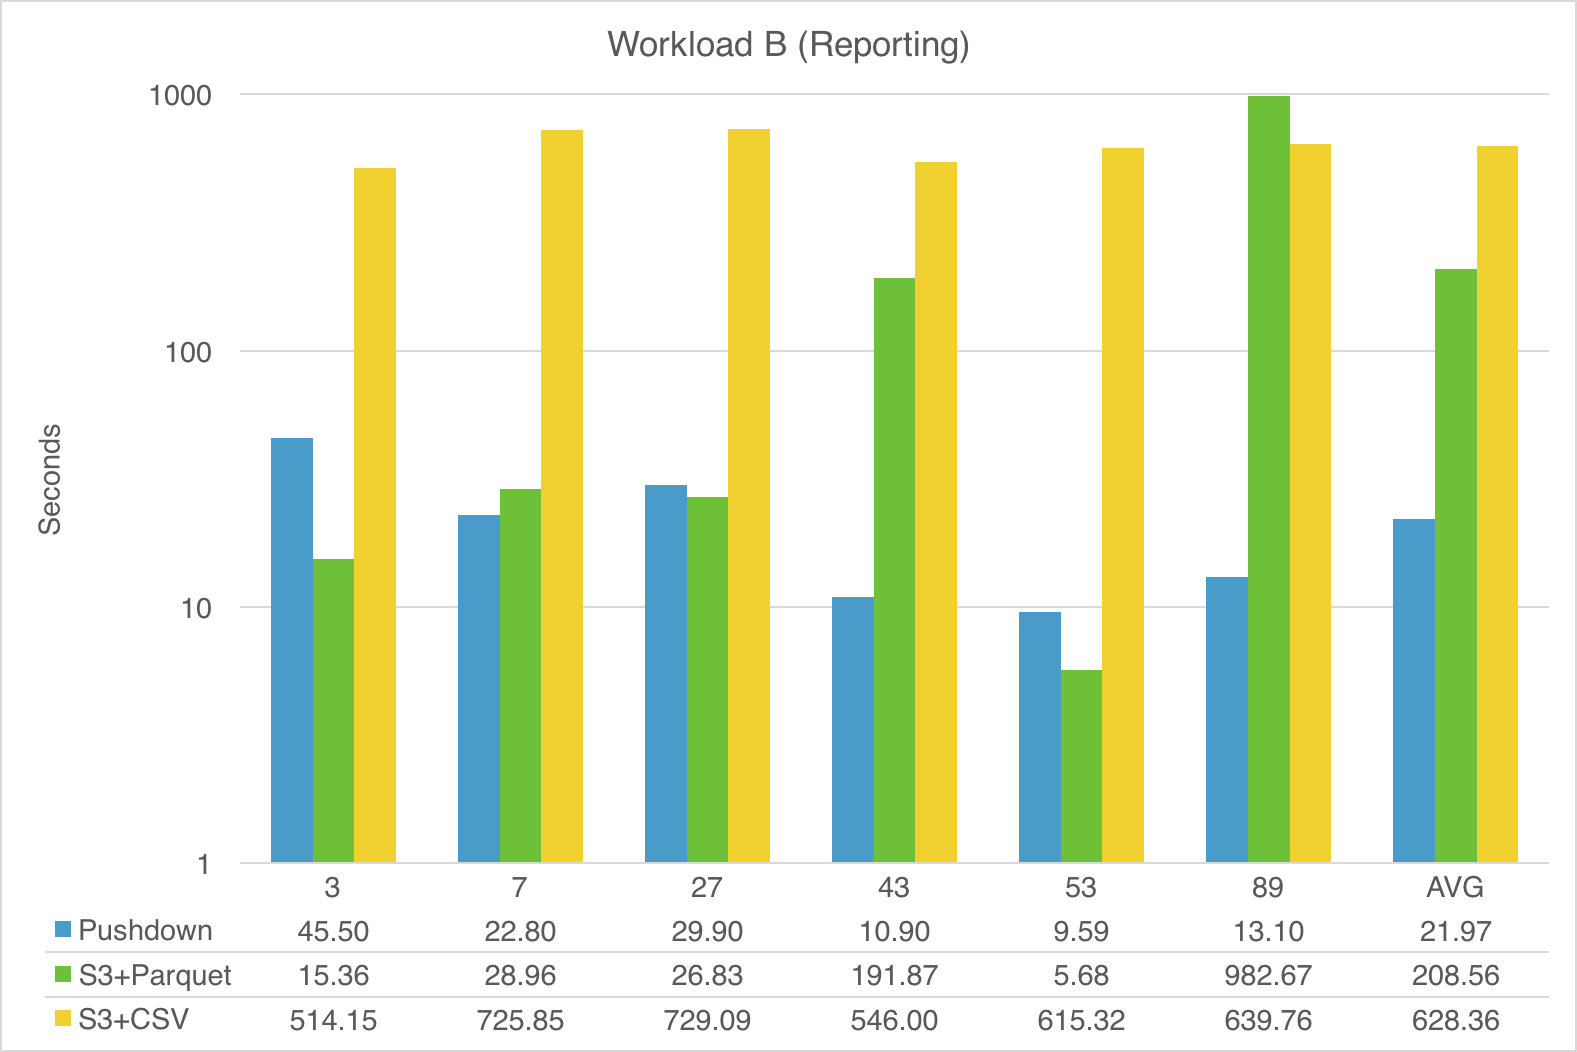 Performance comparison between queries in Workload B with pushdown vs no pushdown